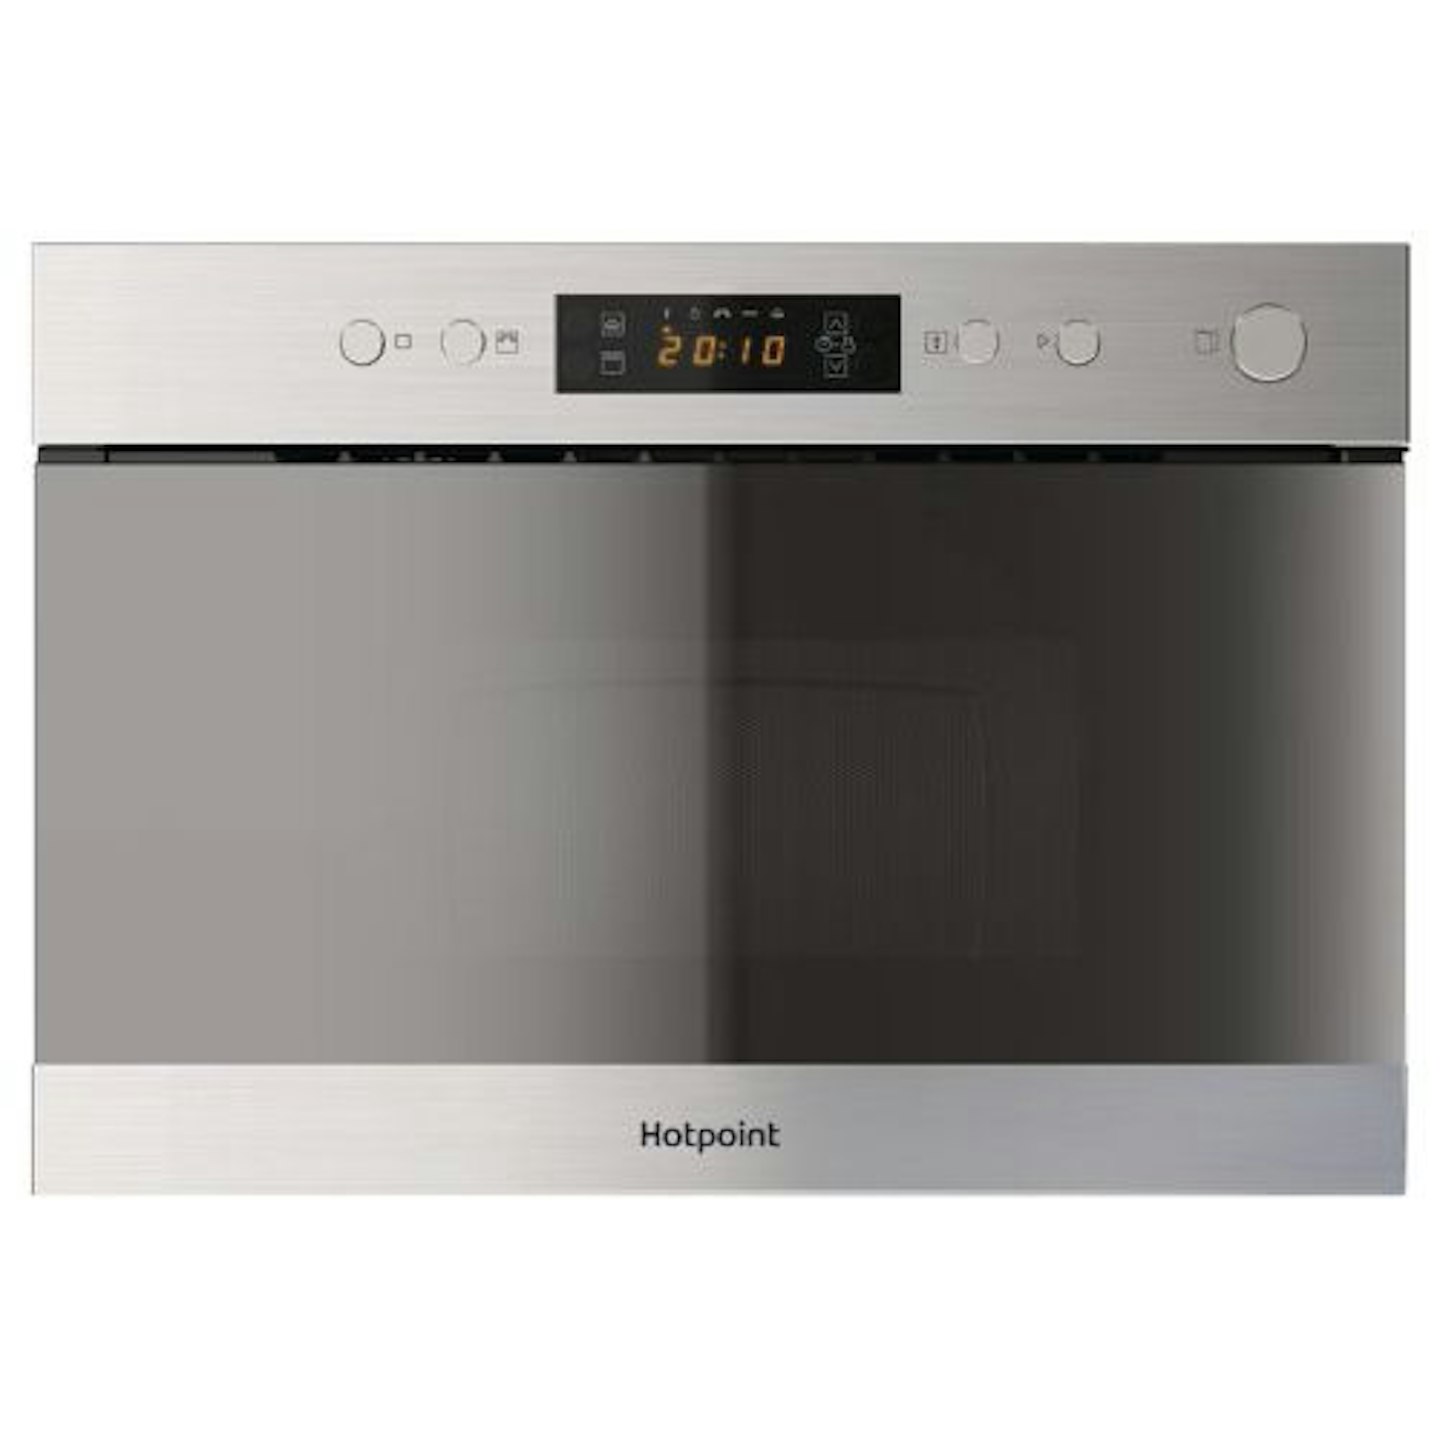 Hotpoint Built-In Microwave with Grill